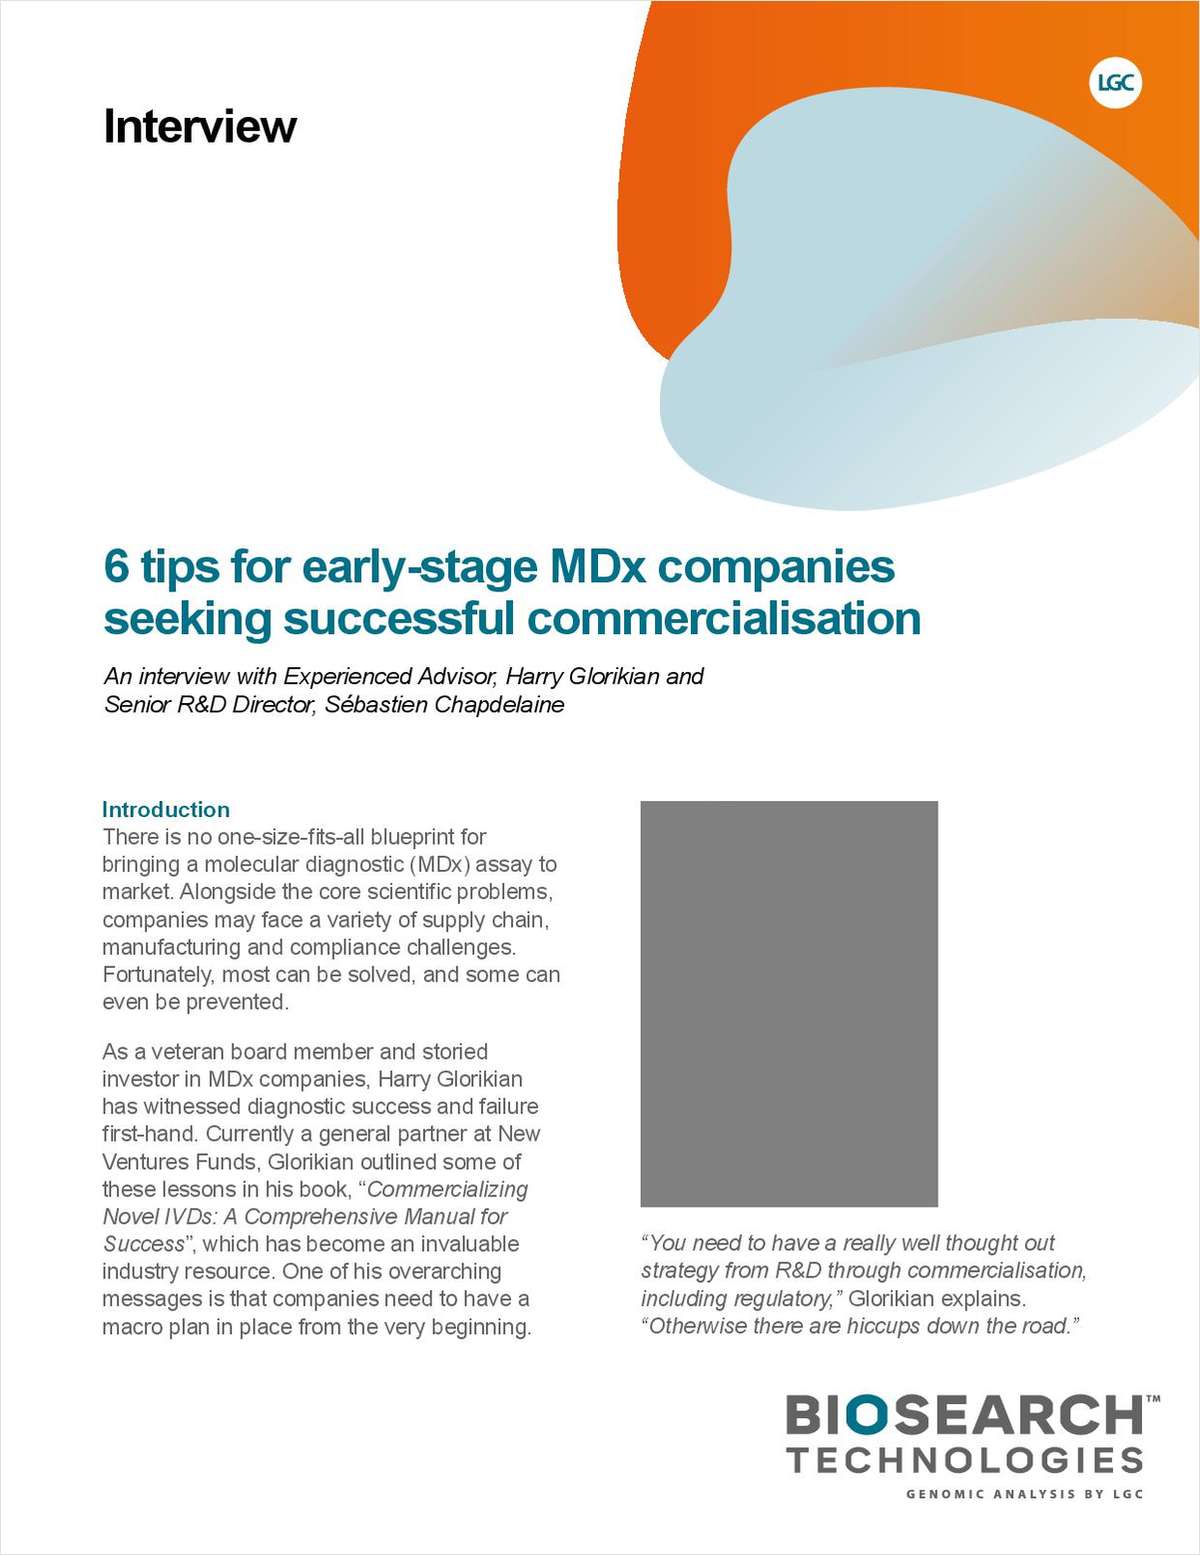 Six Tips for Early-Stage MDx Companies Seeking Successful Commercialization